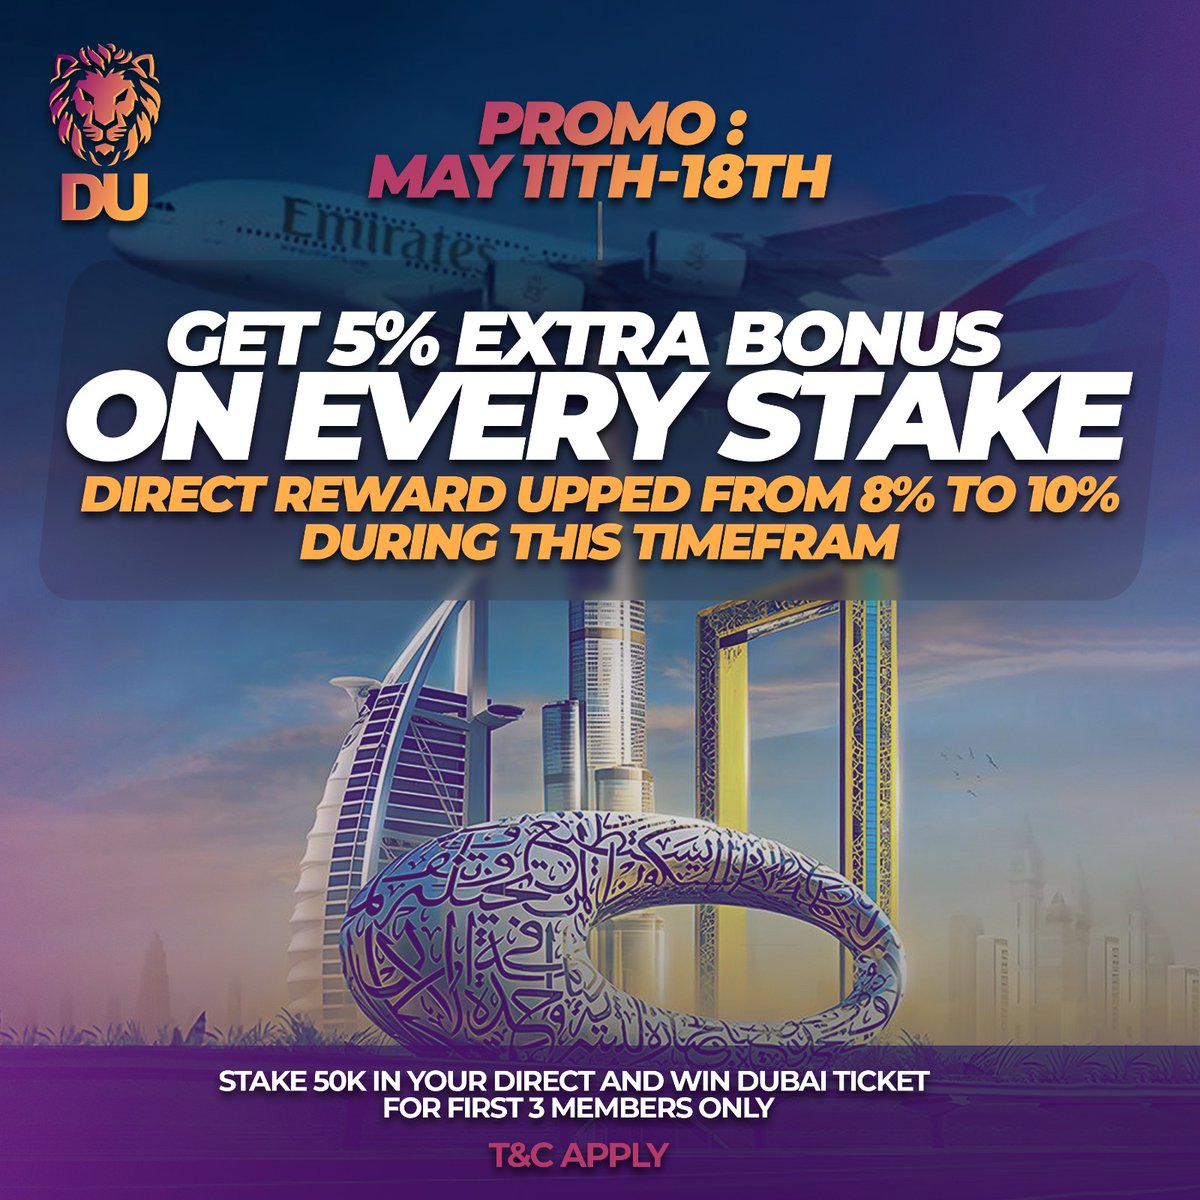 🌟 Dive into Du Coin Delights! 🌟

Stake & Gain! Get 5% extra on Du Coin stakes and level up rewards to 10%! 💰✨

#DuCoinDelights #StakeAndWin #DubaiDreams #DU_Solutions #ducoin #DuCoinCommunity #cyrptonews #CryptoCommunity #stakeearn #staketoelevate #StakeWithDU